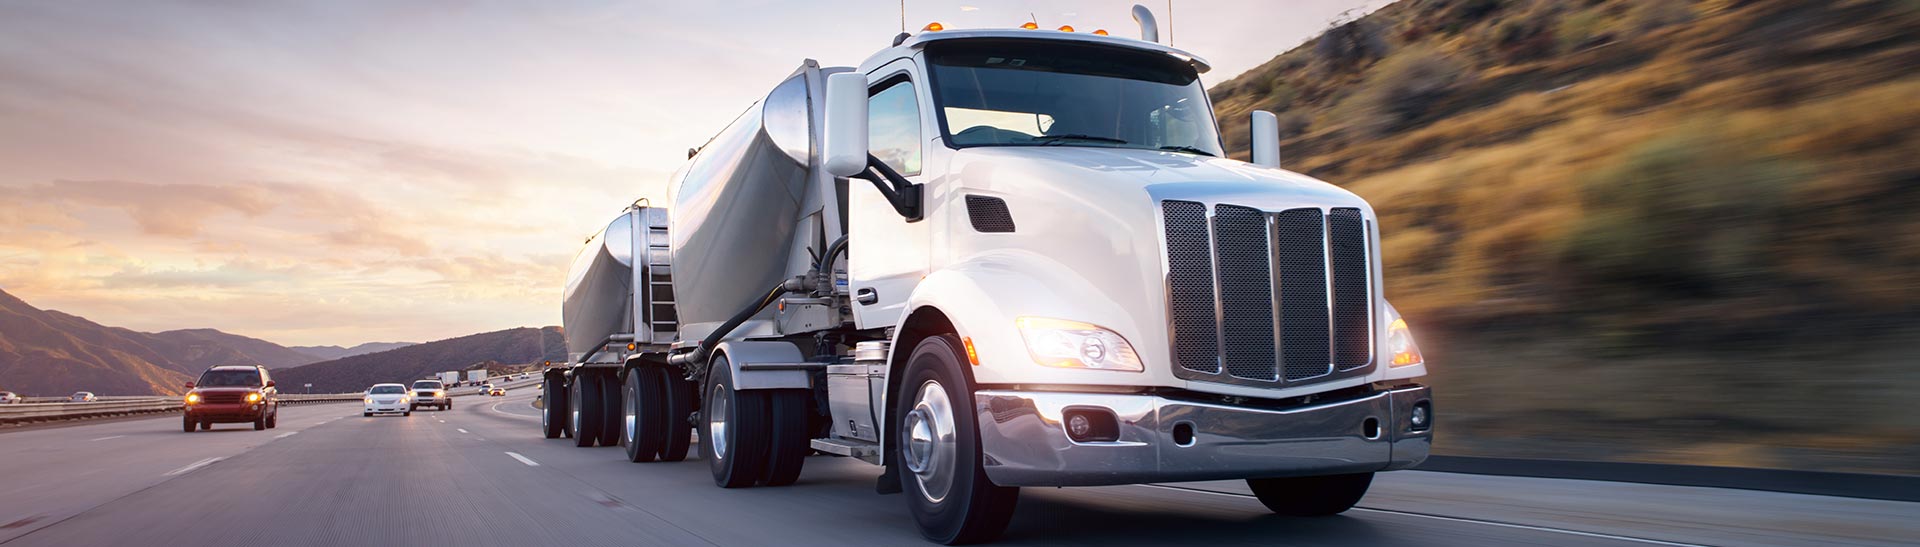 Houston Transportation Logistics, Freight Forwarding Services and Trucking Services